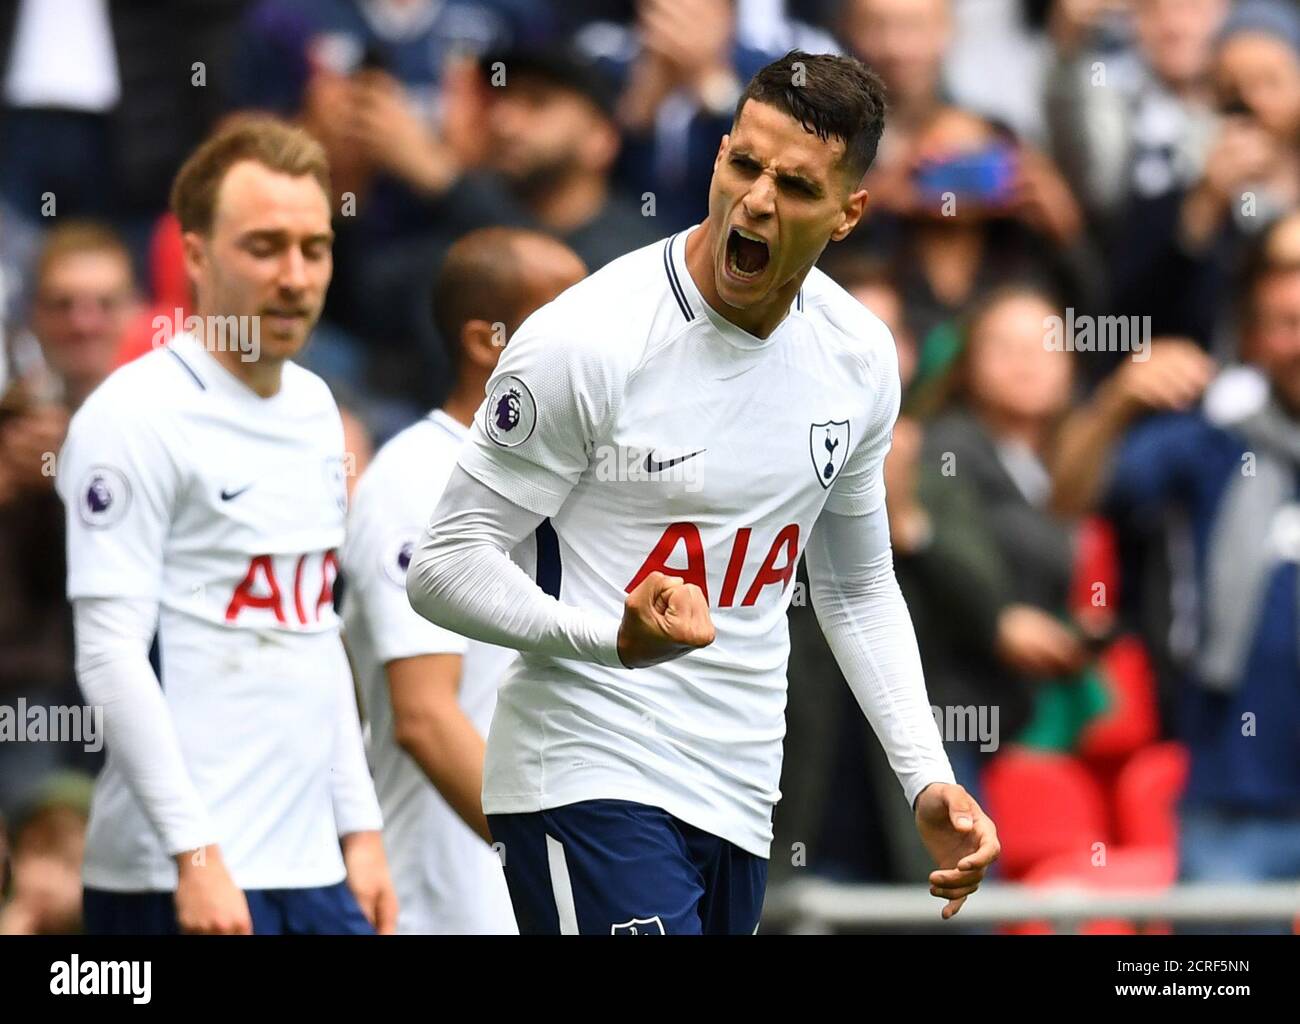 Soccer Football - Premier League - Tottenham Hotspur vs Leicester City - Wembley Stadium, London, Britain - May 13, 2018   Tottenham's Erik Lamela celebrates scoring their fourth goal    REUTERS/Dylan Martinez    EDITORIAL USE ONLY. No use with unauthorized audio, video, data, fixture lists, club/league logos or 'live' services. Online in-match use limited to 75 images, no video emulation. No use in betting, games or single club/league/player publications.  Please contact your account representative for further details. Stock Photo